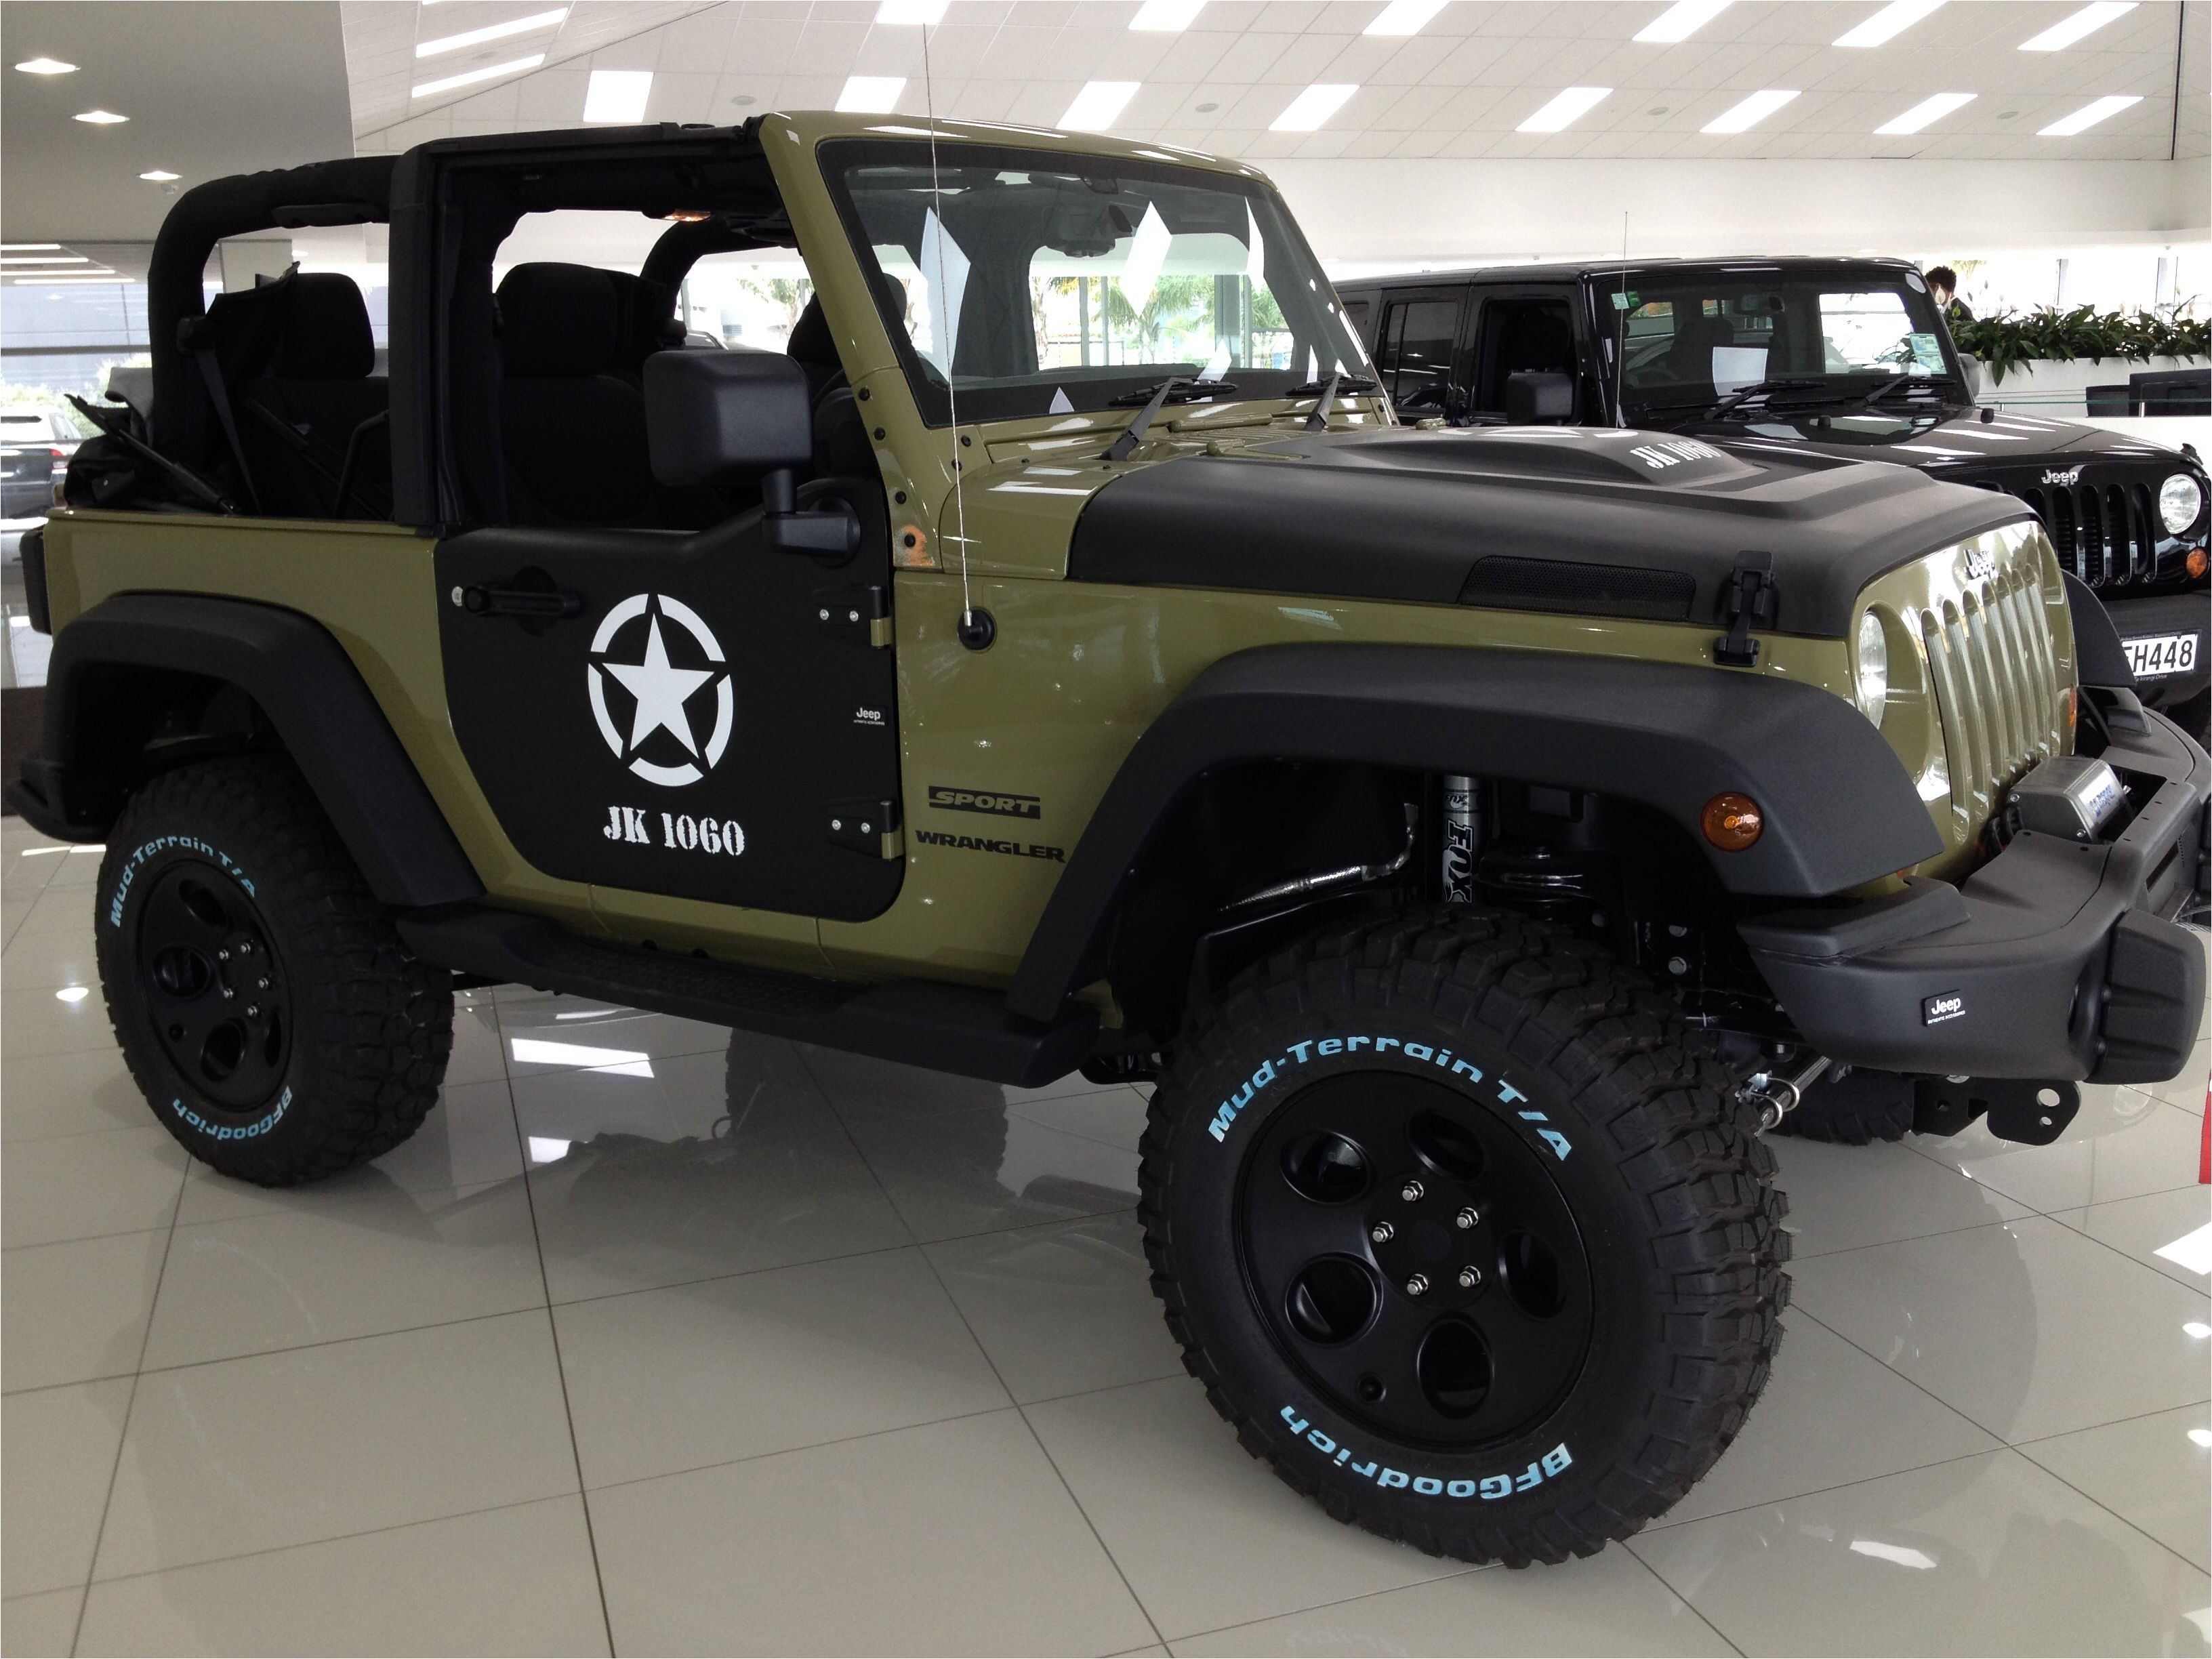 small jeeps for sale green and black jeep od green and black jeep wrangler of small jeeps for sale